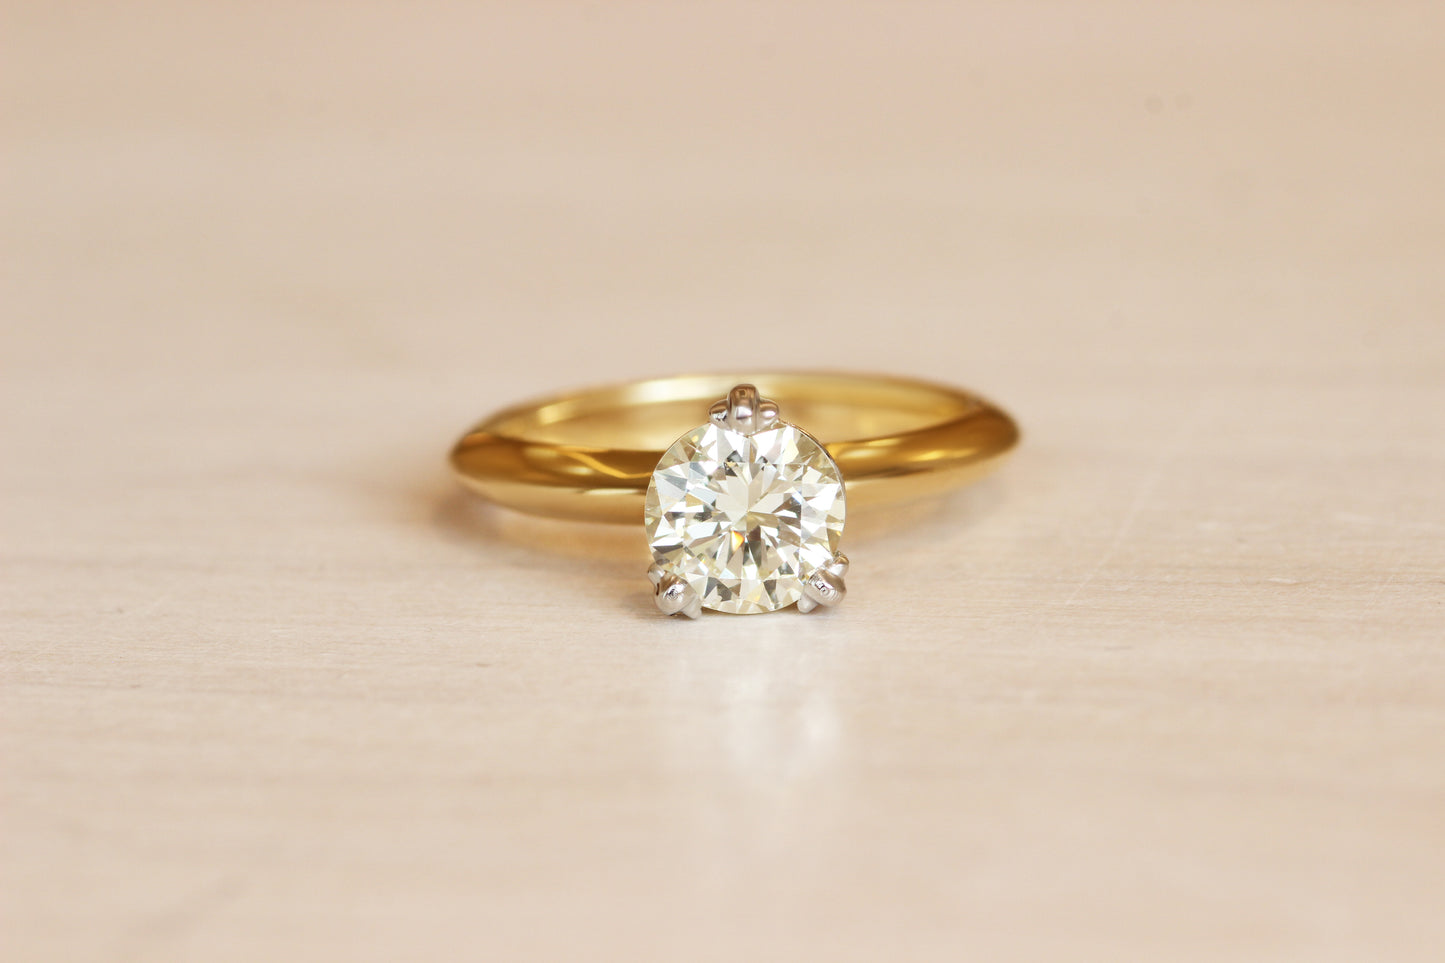 Old euro solitaire ring with recycled yellow gold and a platinum setting, based on our Cornice Collection